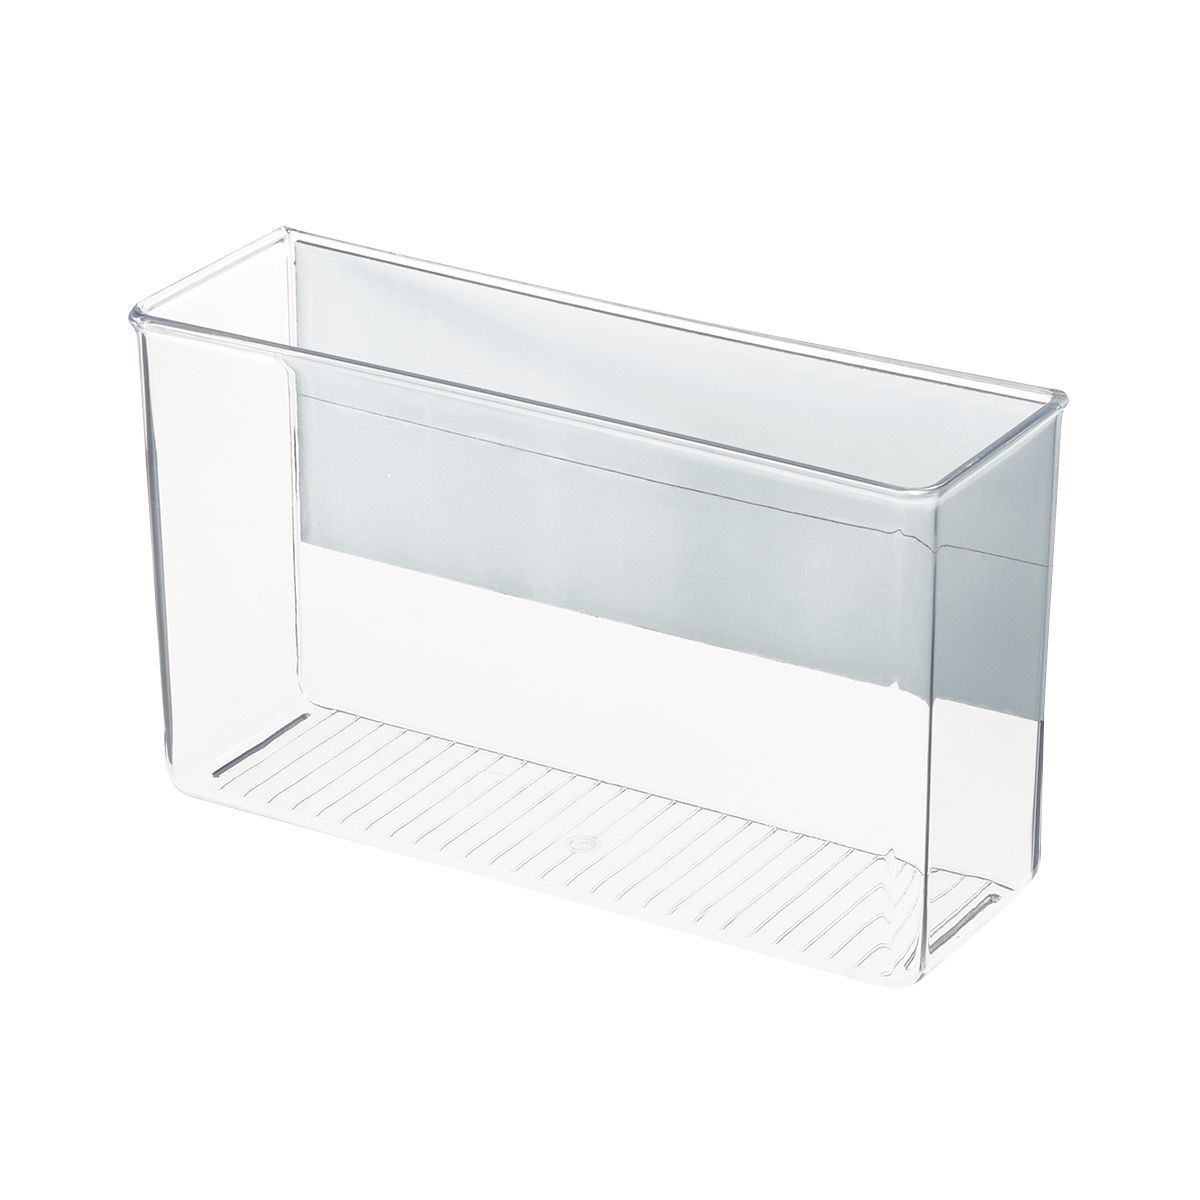 iDESIGN Large Magnetic Bin Clear | The Container Store